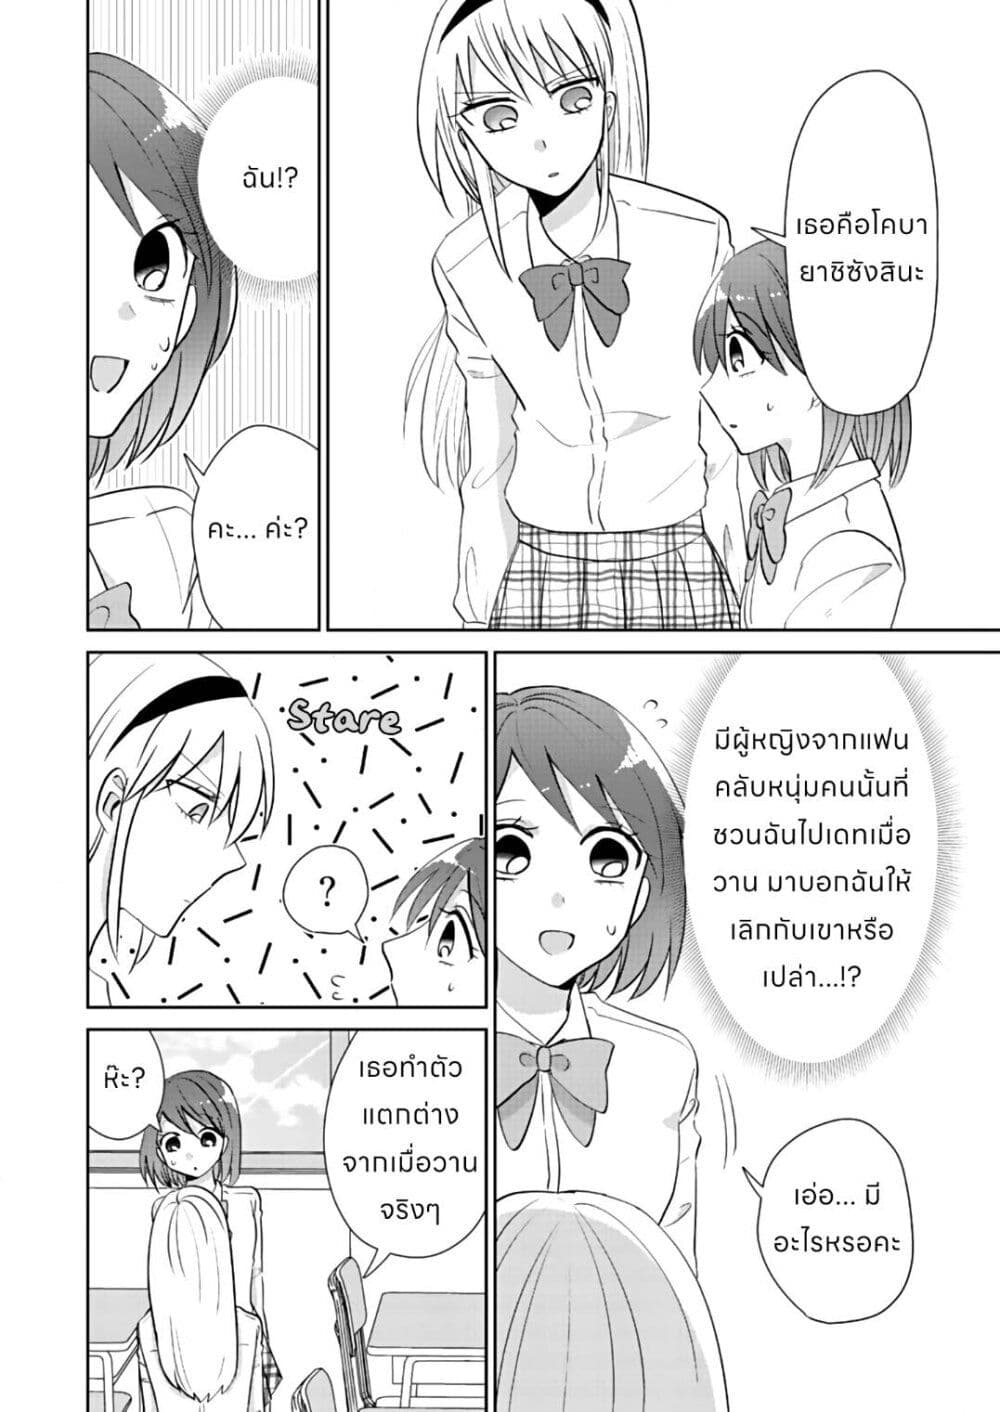 How to Start a Relationship With Crossdressing ตอนที่ 1.3 (5)